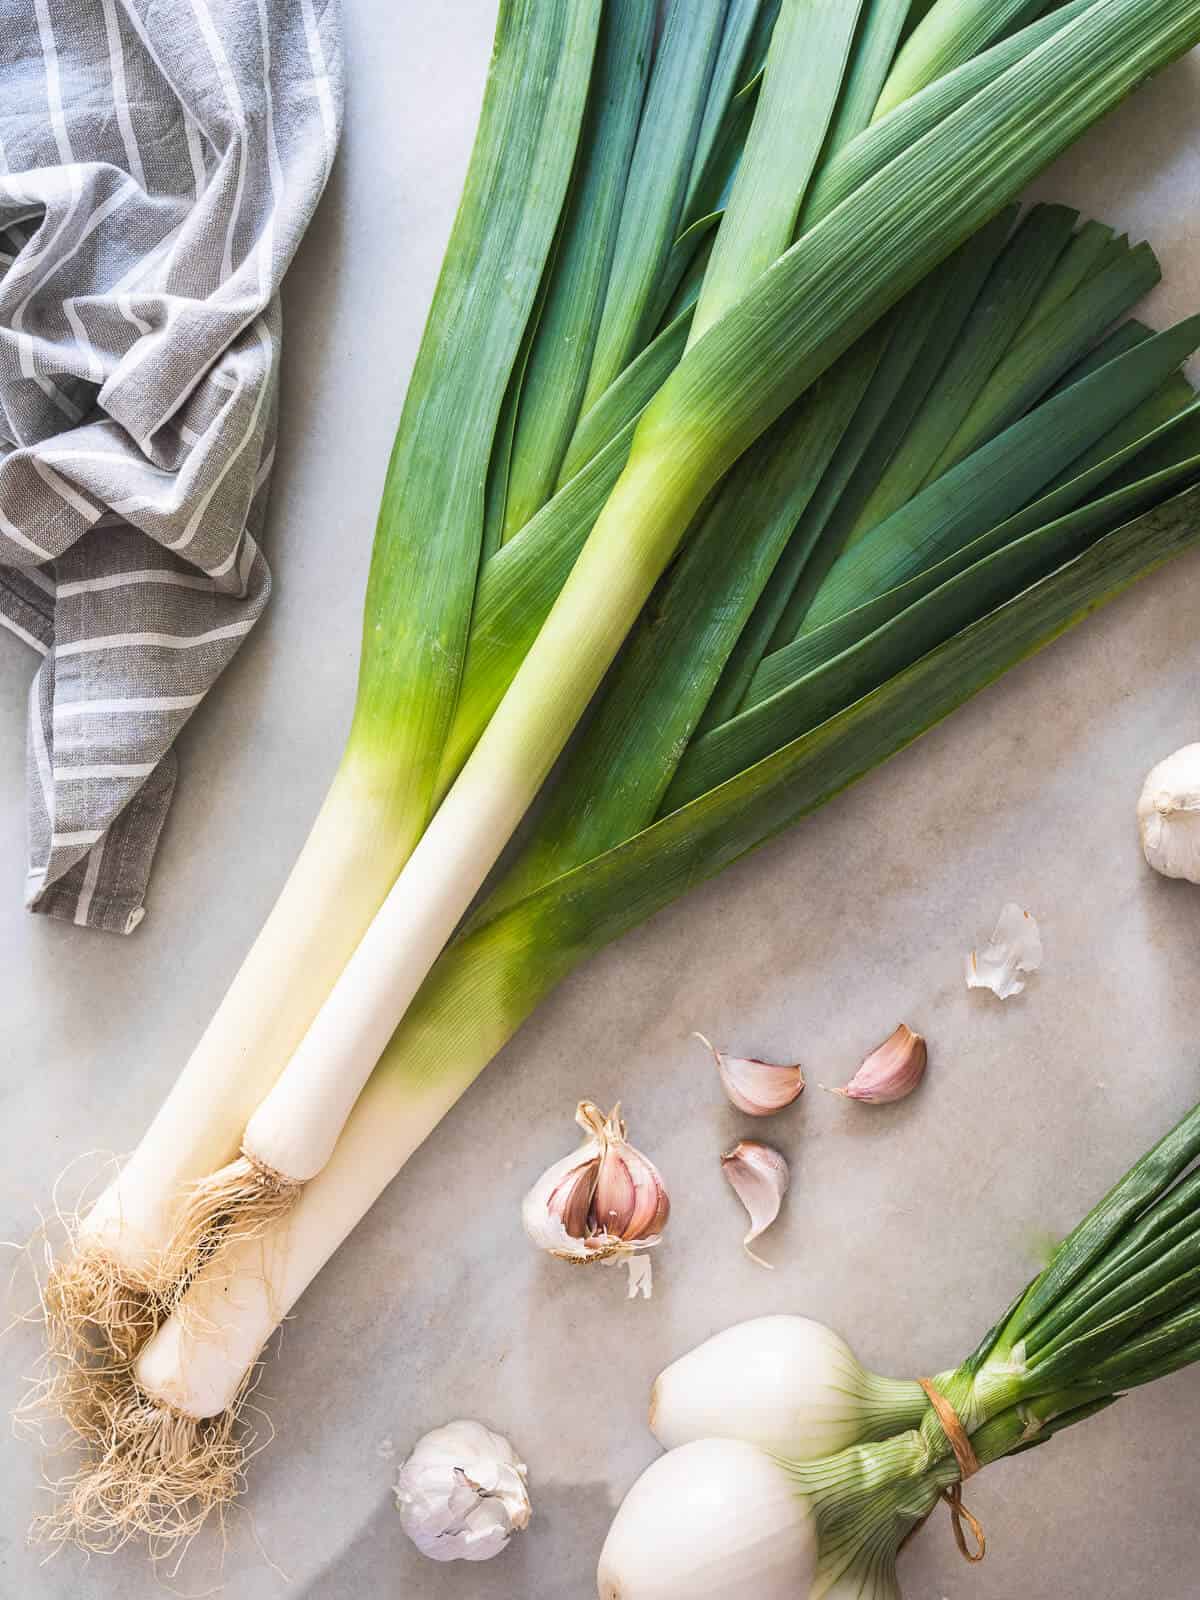 Leeks with onions and garlic as leek substitutes on a table. 